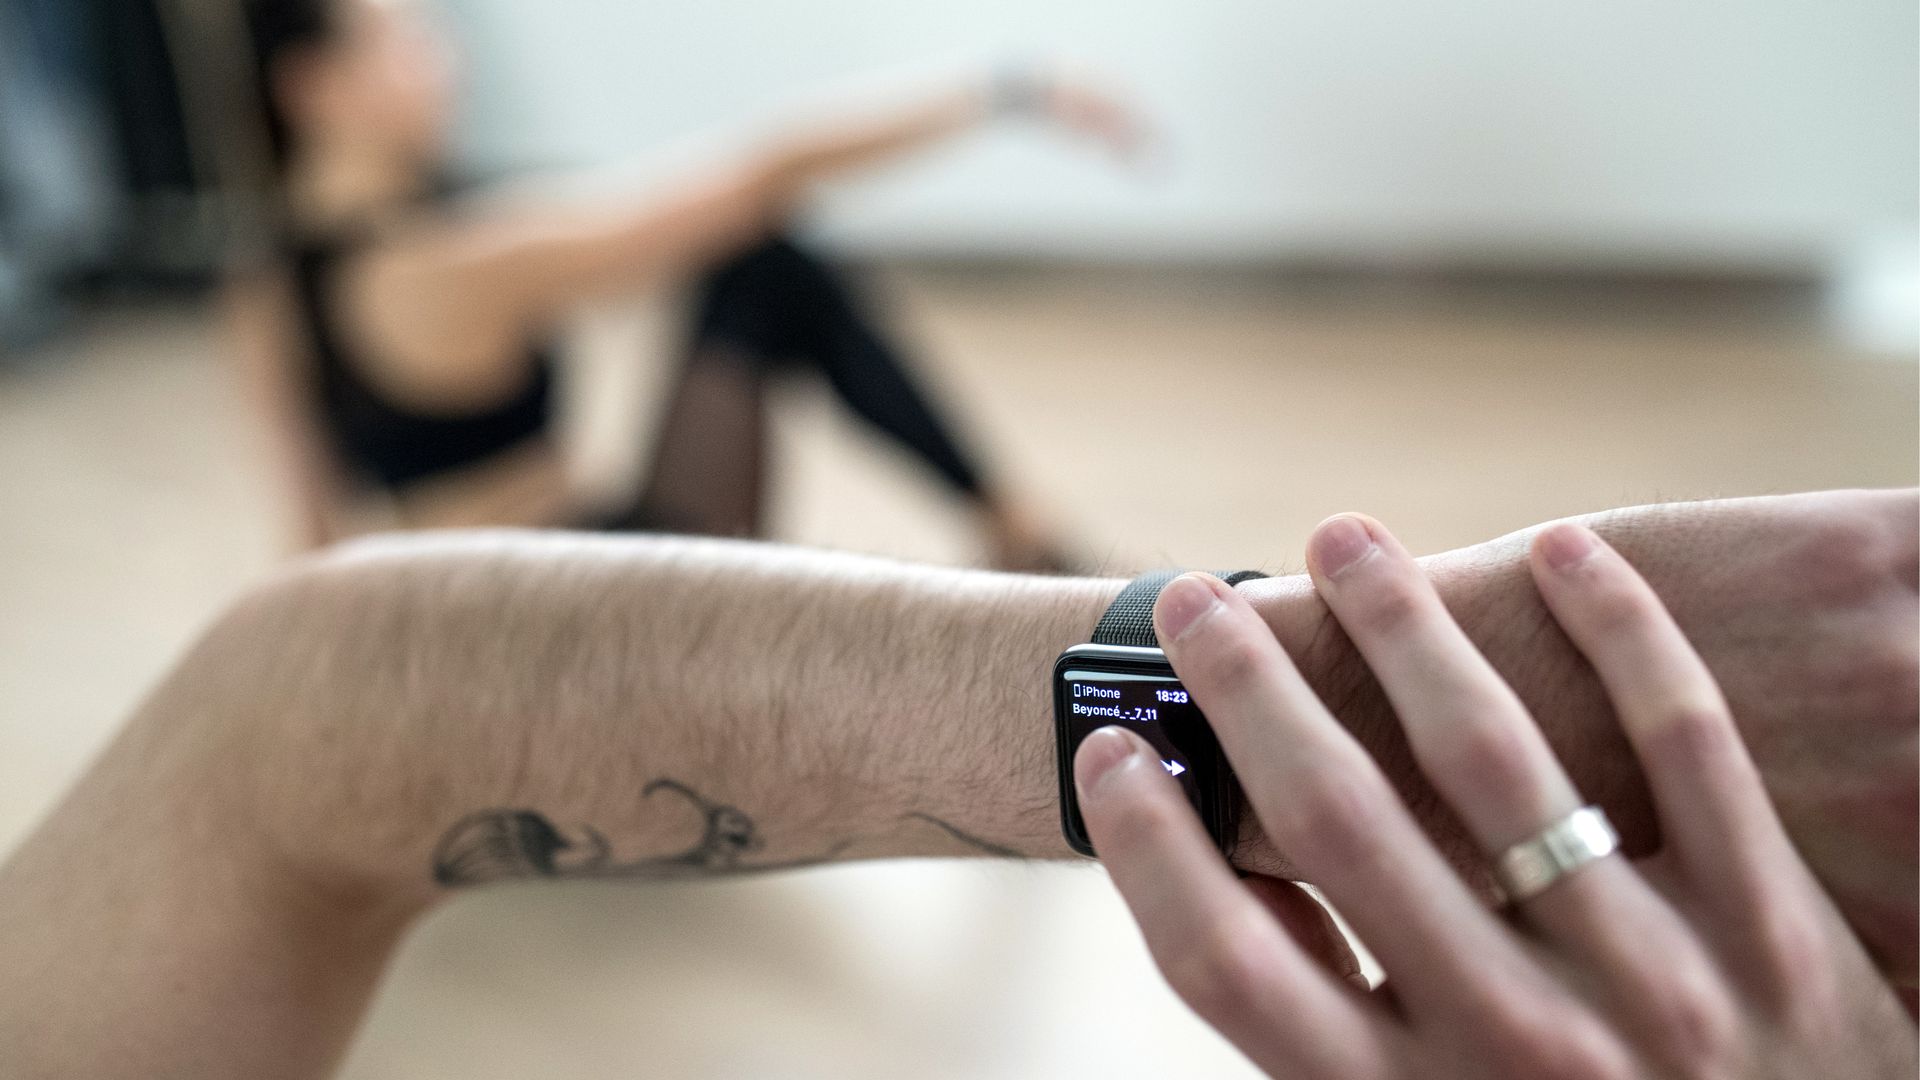  Someone's hand touching their apple watch with a blurred figure stretching or doing yoga in the background.